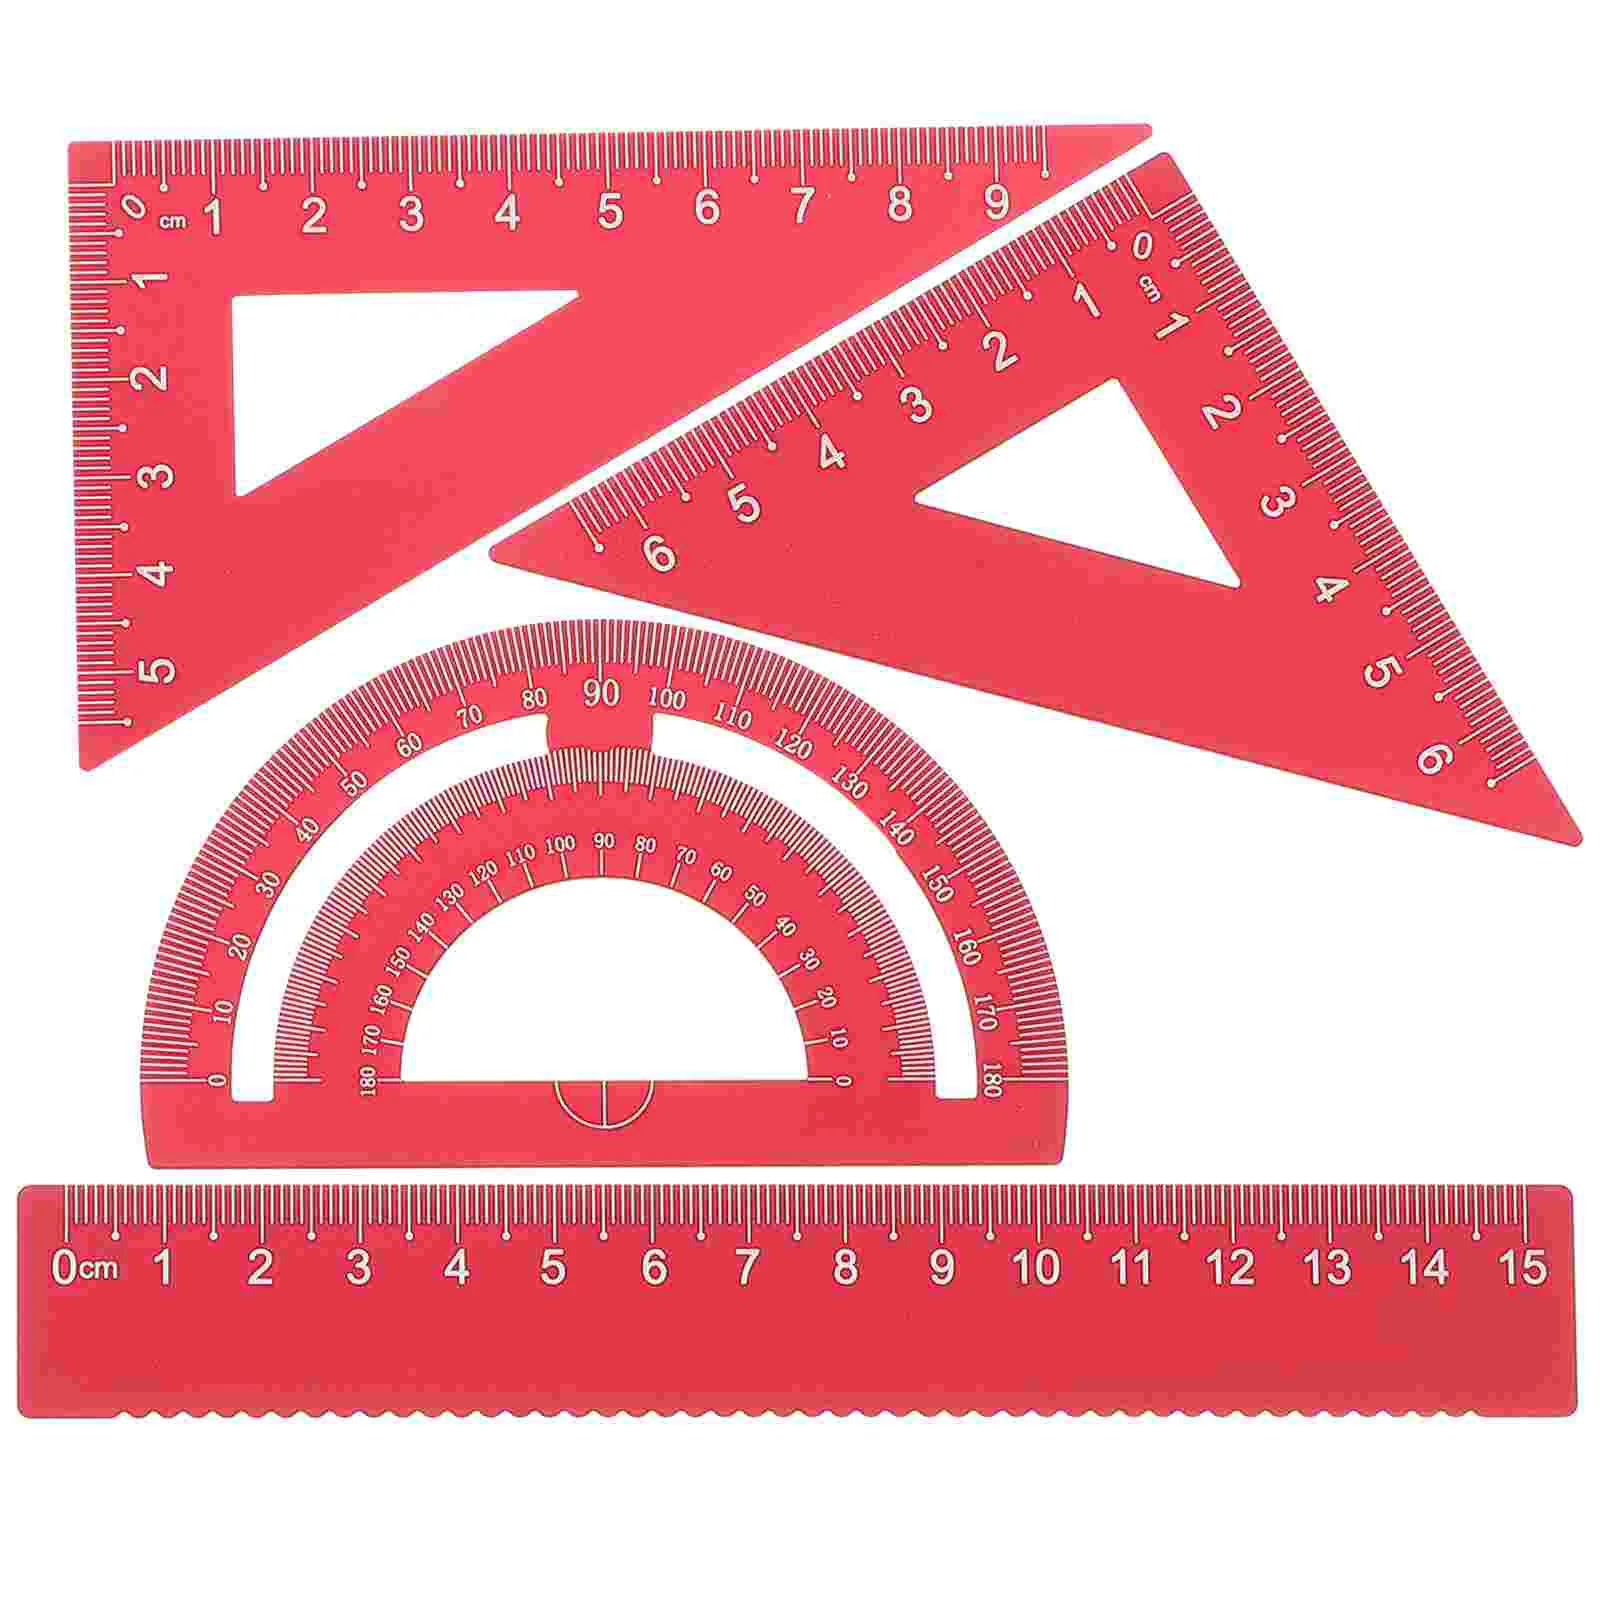 4 Pack Geometry Set Metal Triangle Ruler Protractor Straight Ruler Tool Set Math Protractor School and Office Supplies for Kids